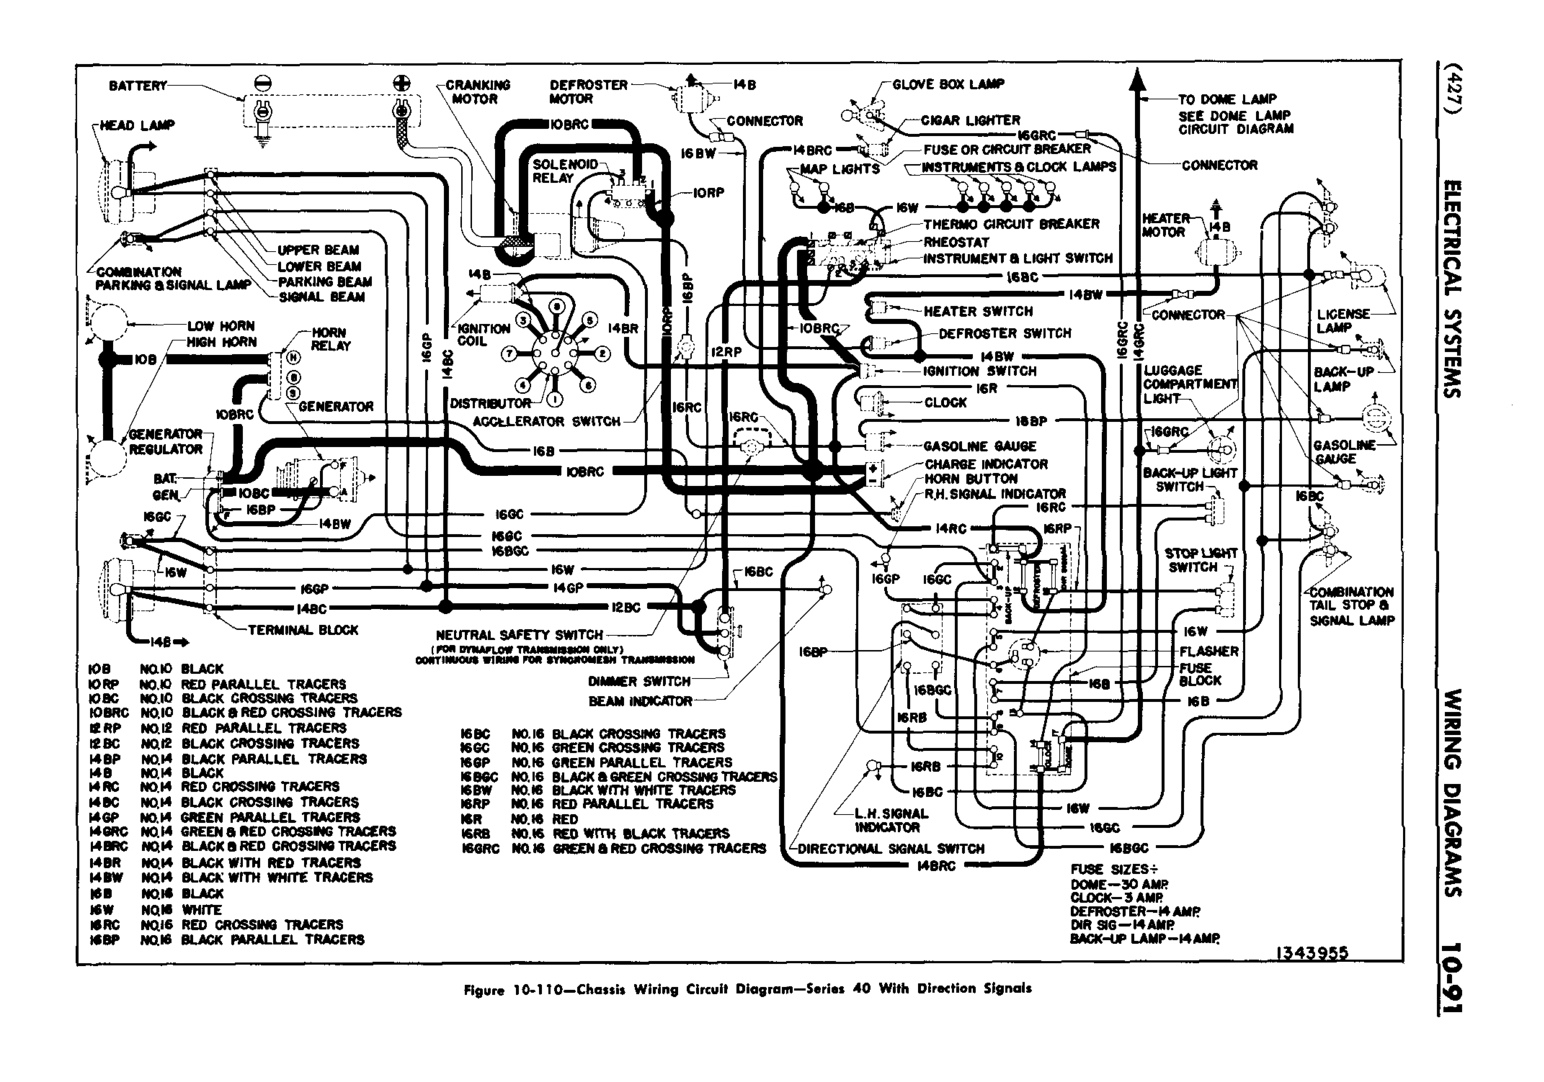 n_11 1952 Buick Shop Manual - Electrical Systems-091-091.jpg